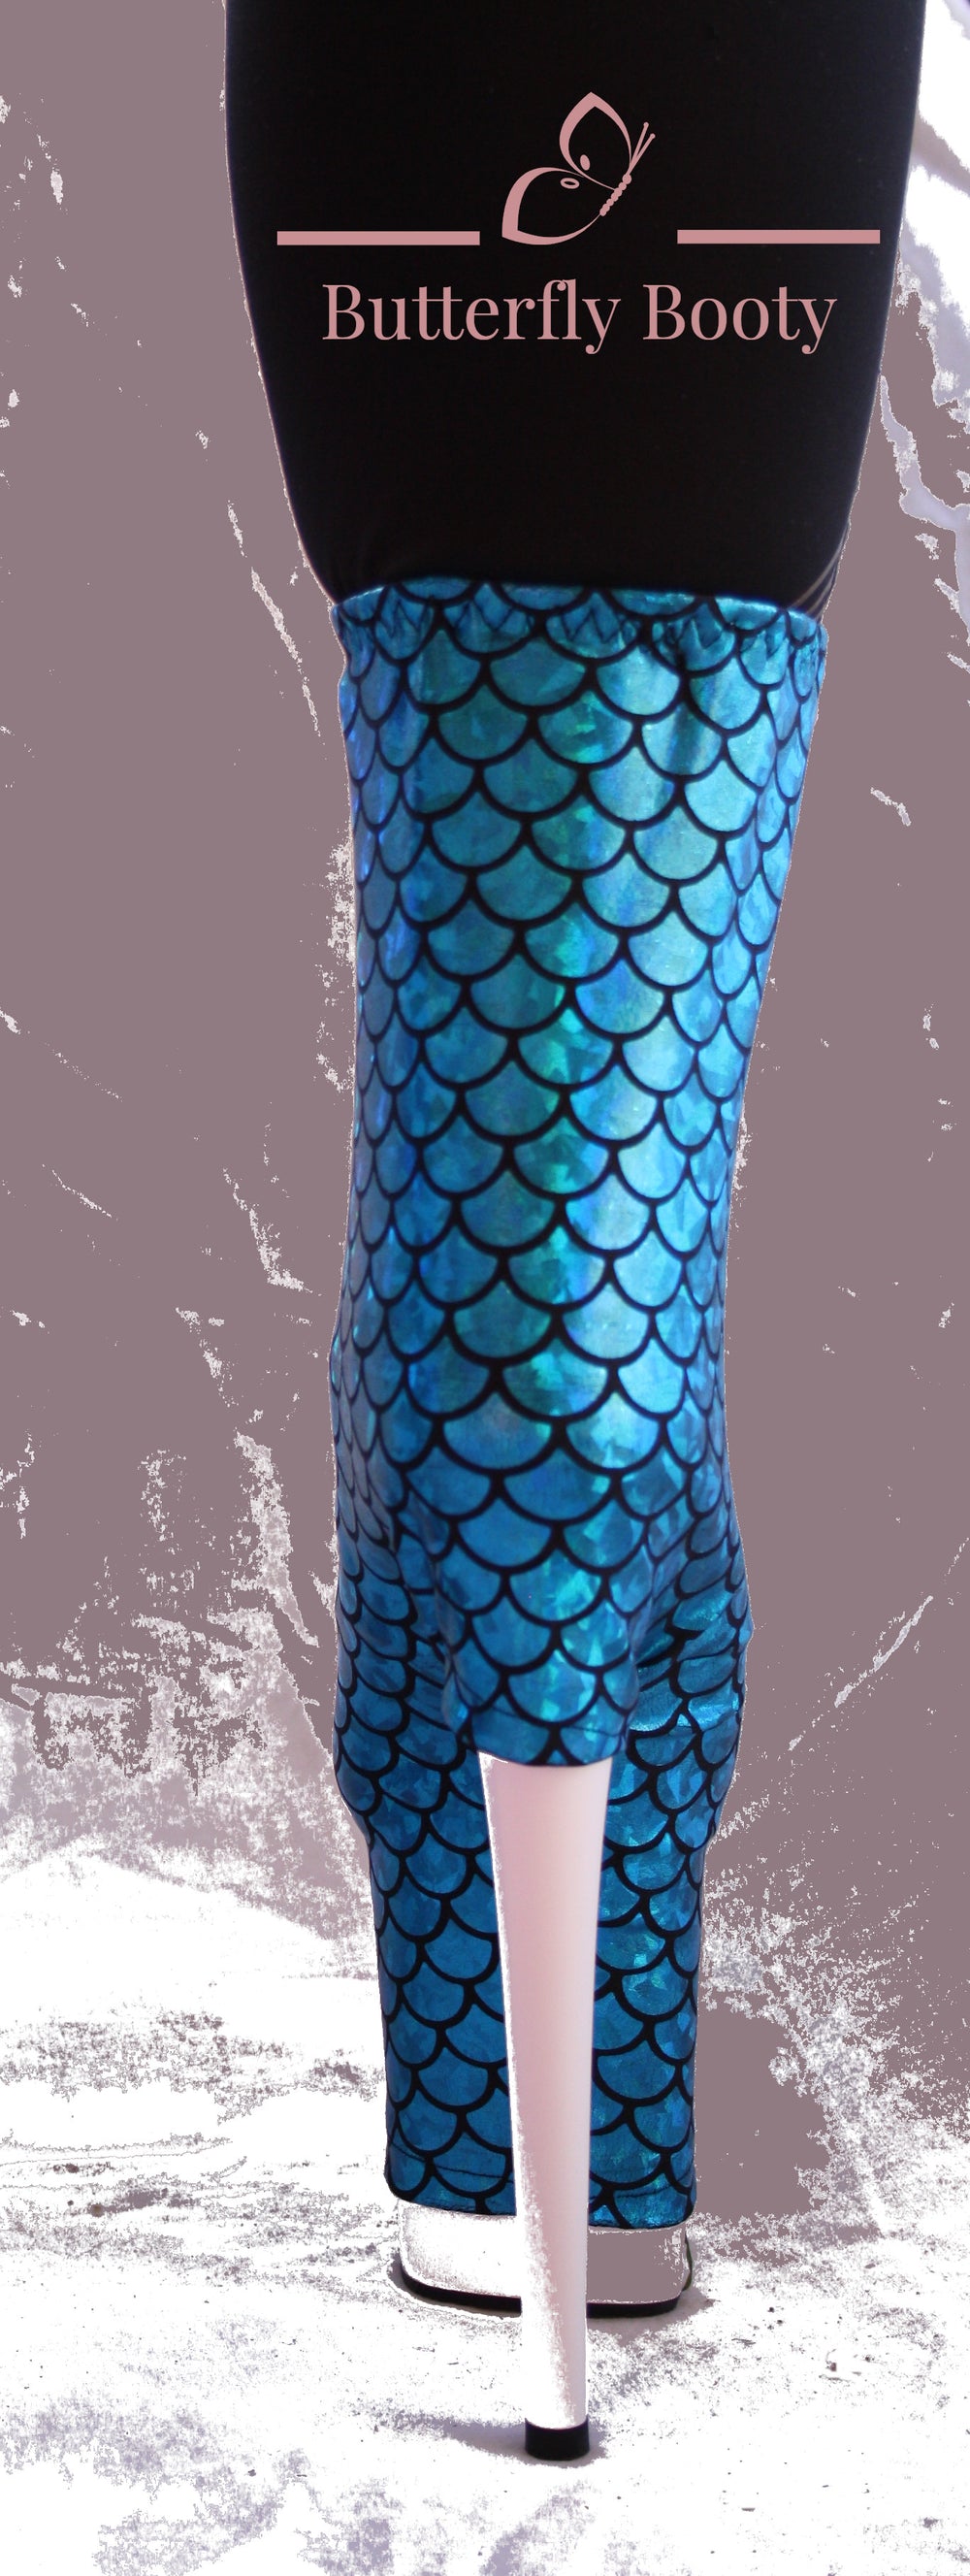 BUTTERFLY BOOTY Boot Covers - Blue Scales